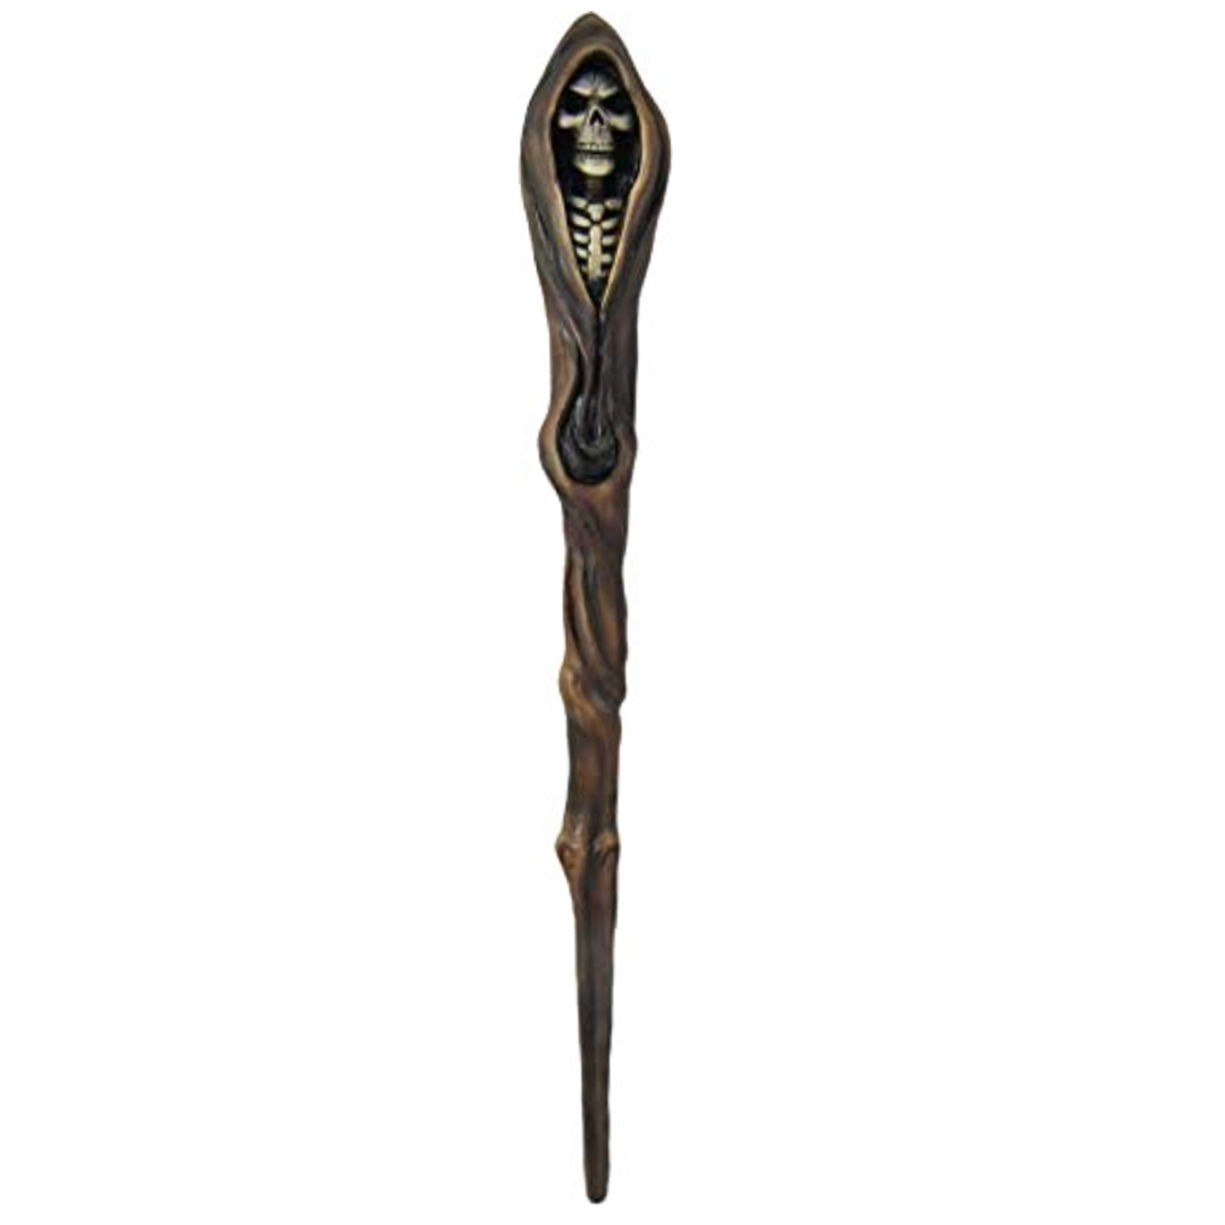 Reaper Wand of Mortality is 14-1/2" long, hand-painted resin with detailed, haunting visage